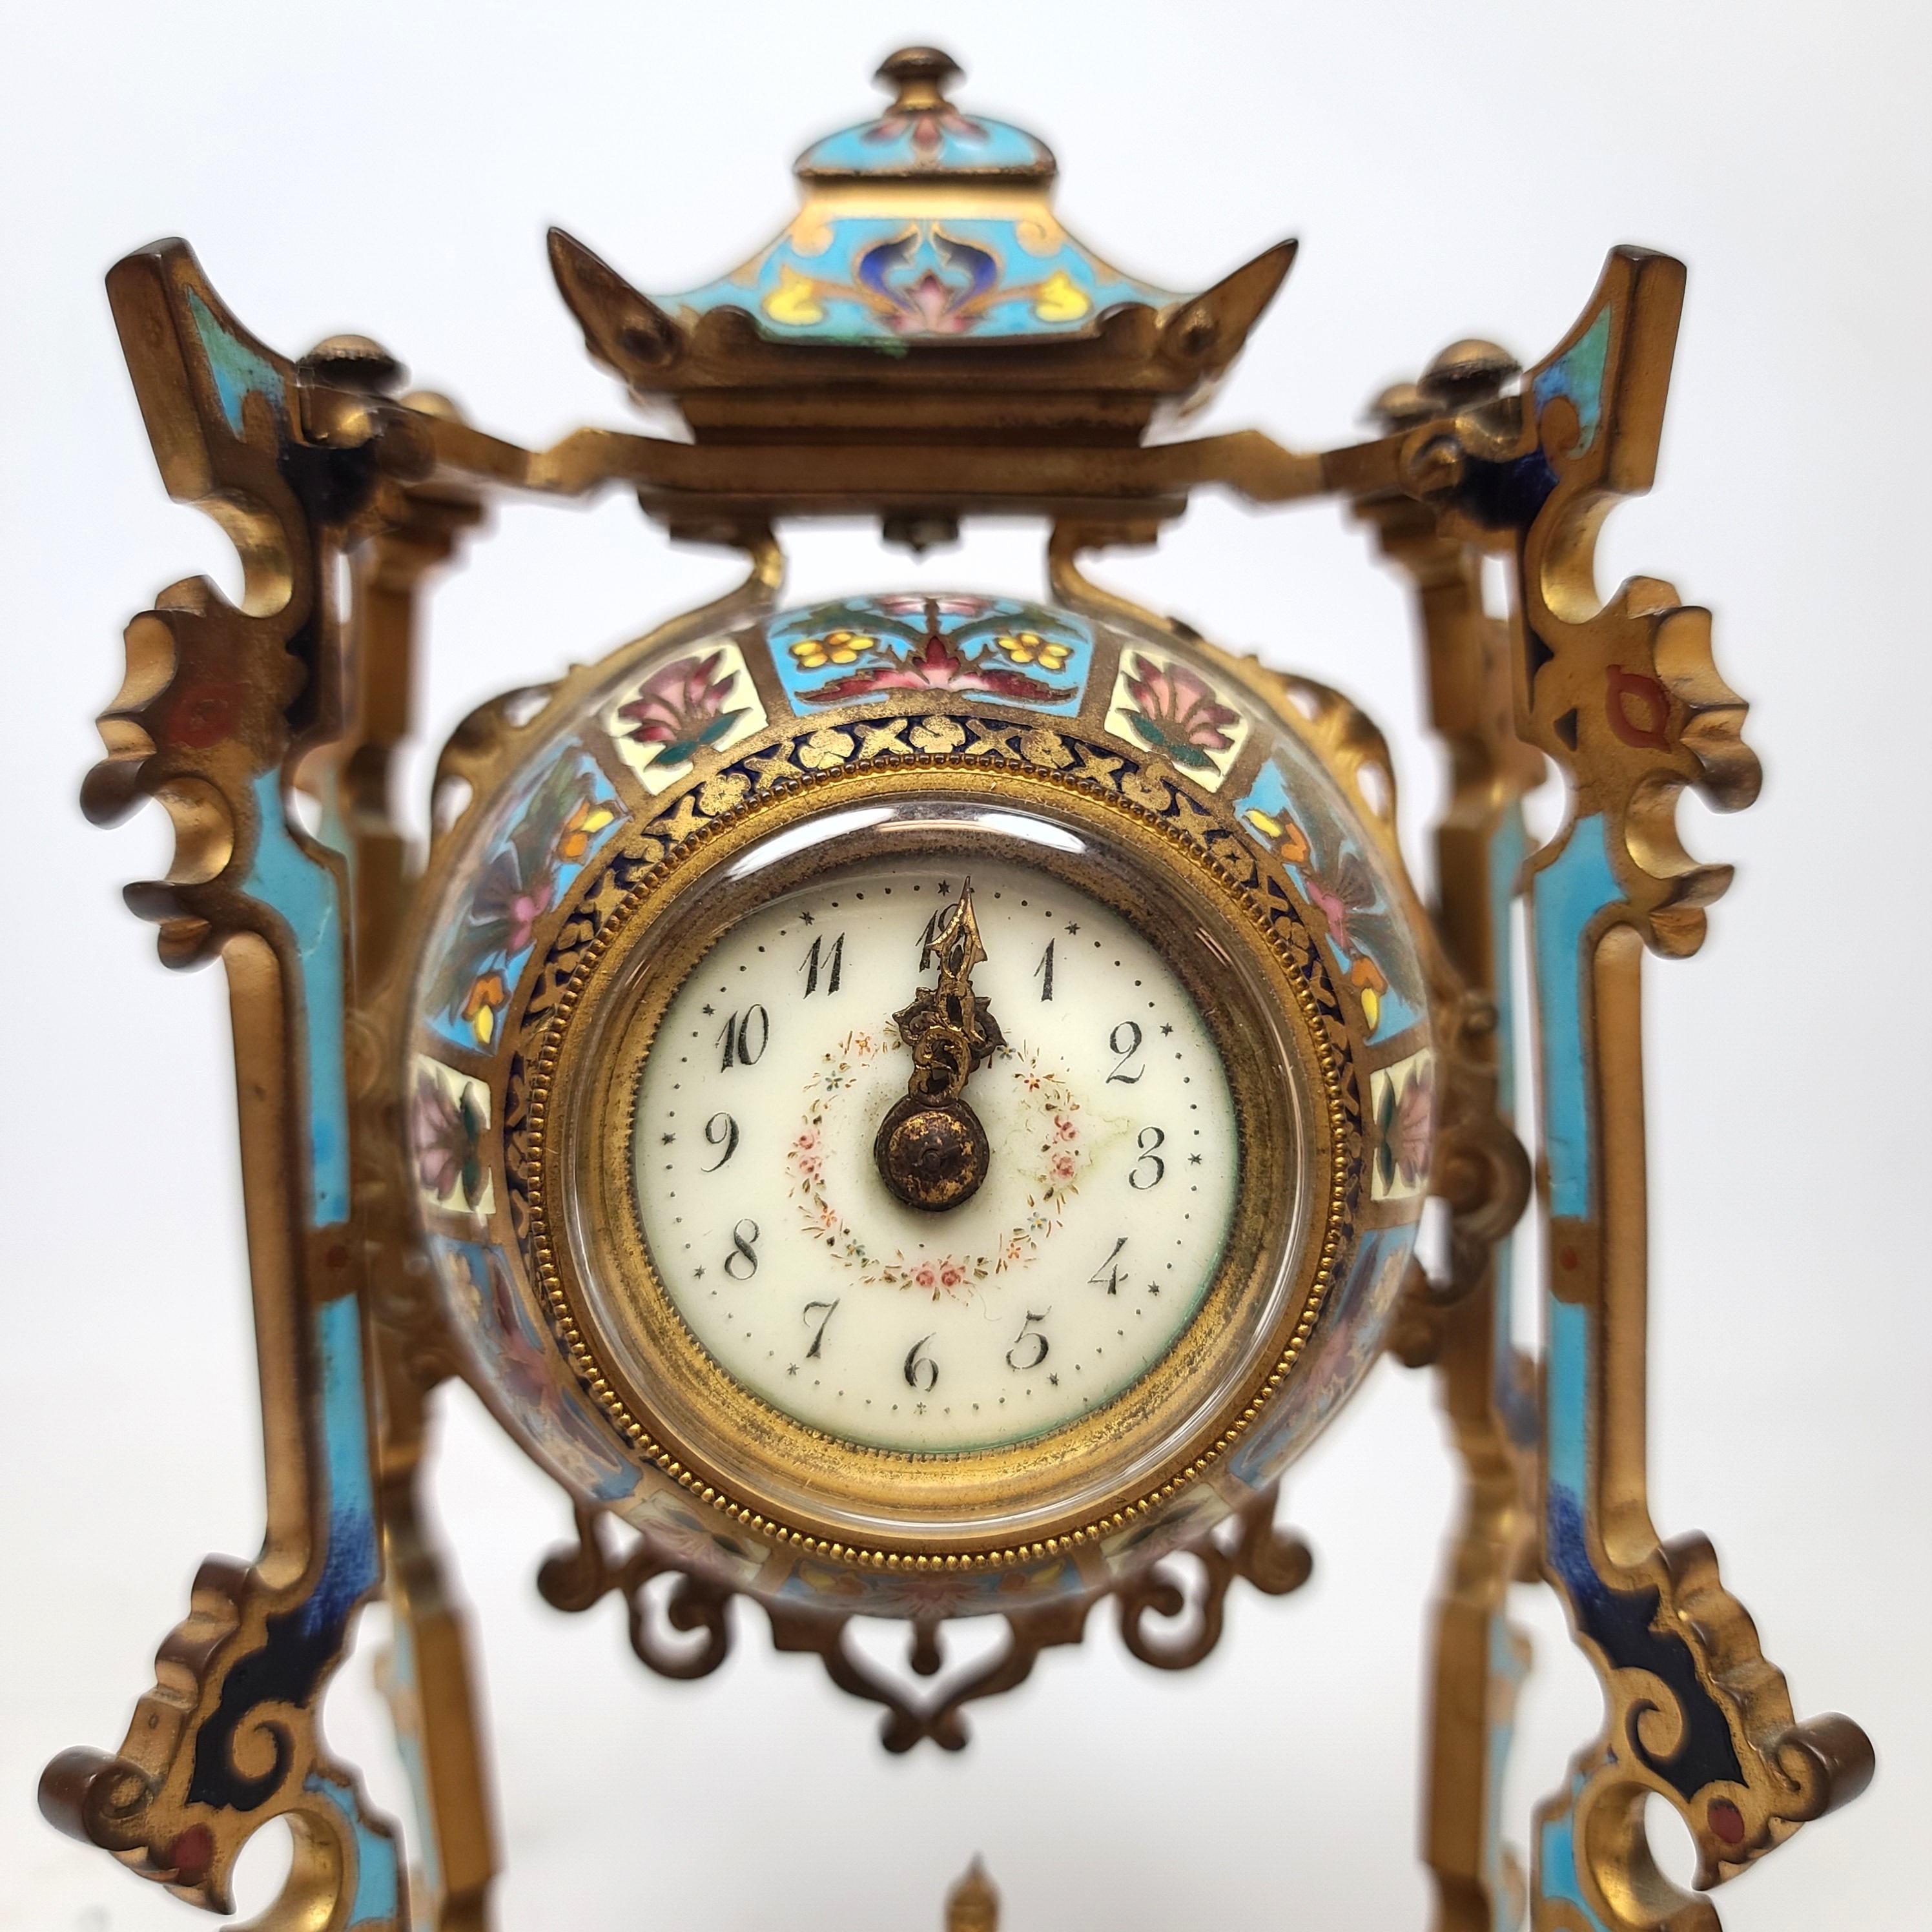 French 19th century diminutive chinoiserie champlevé clock set with a seated Buddha figure in the middle.
 